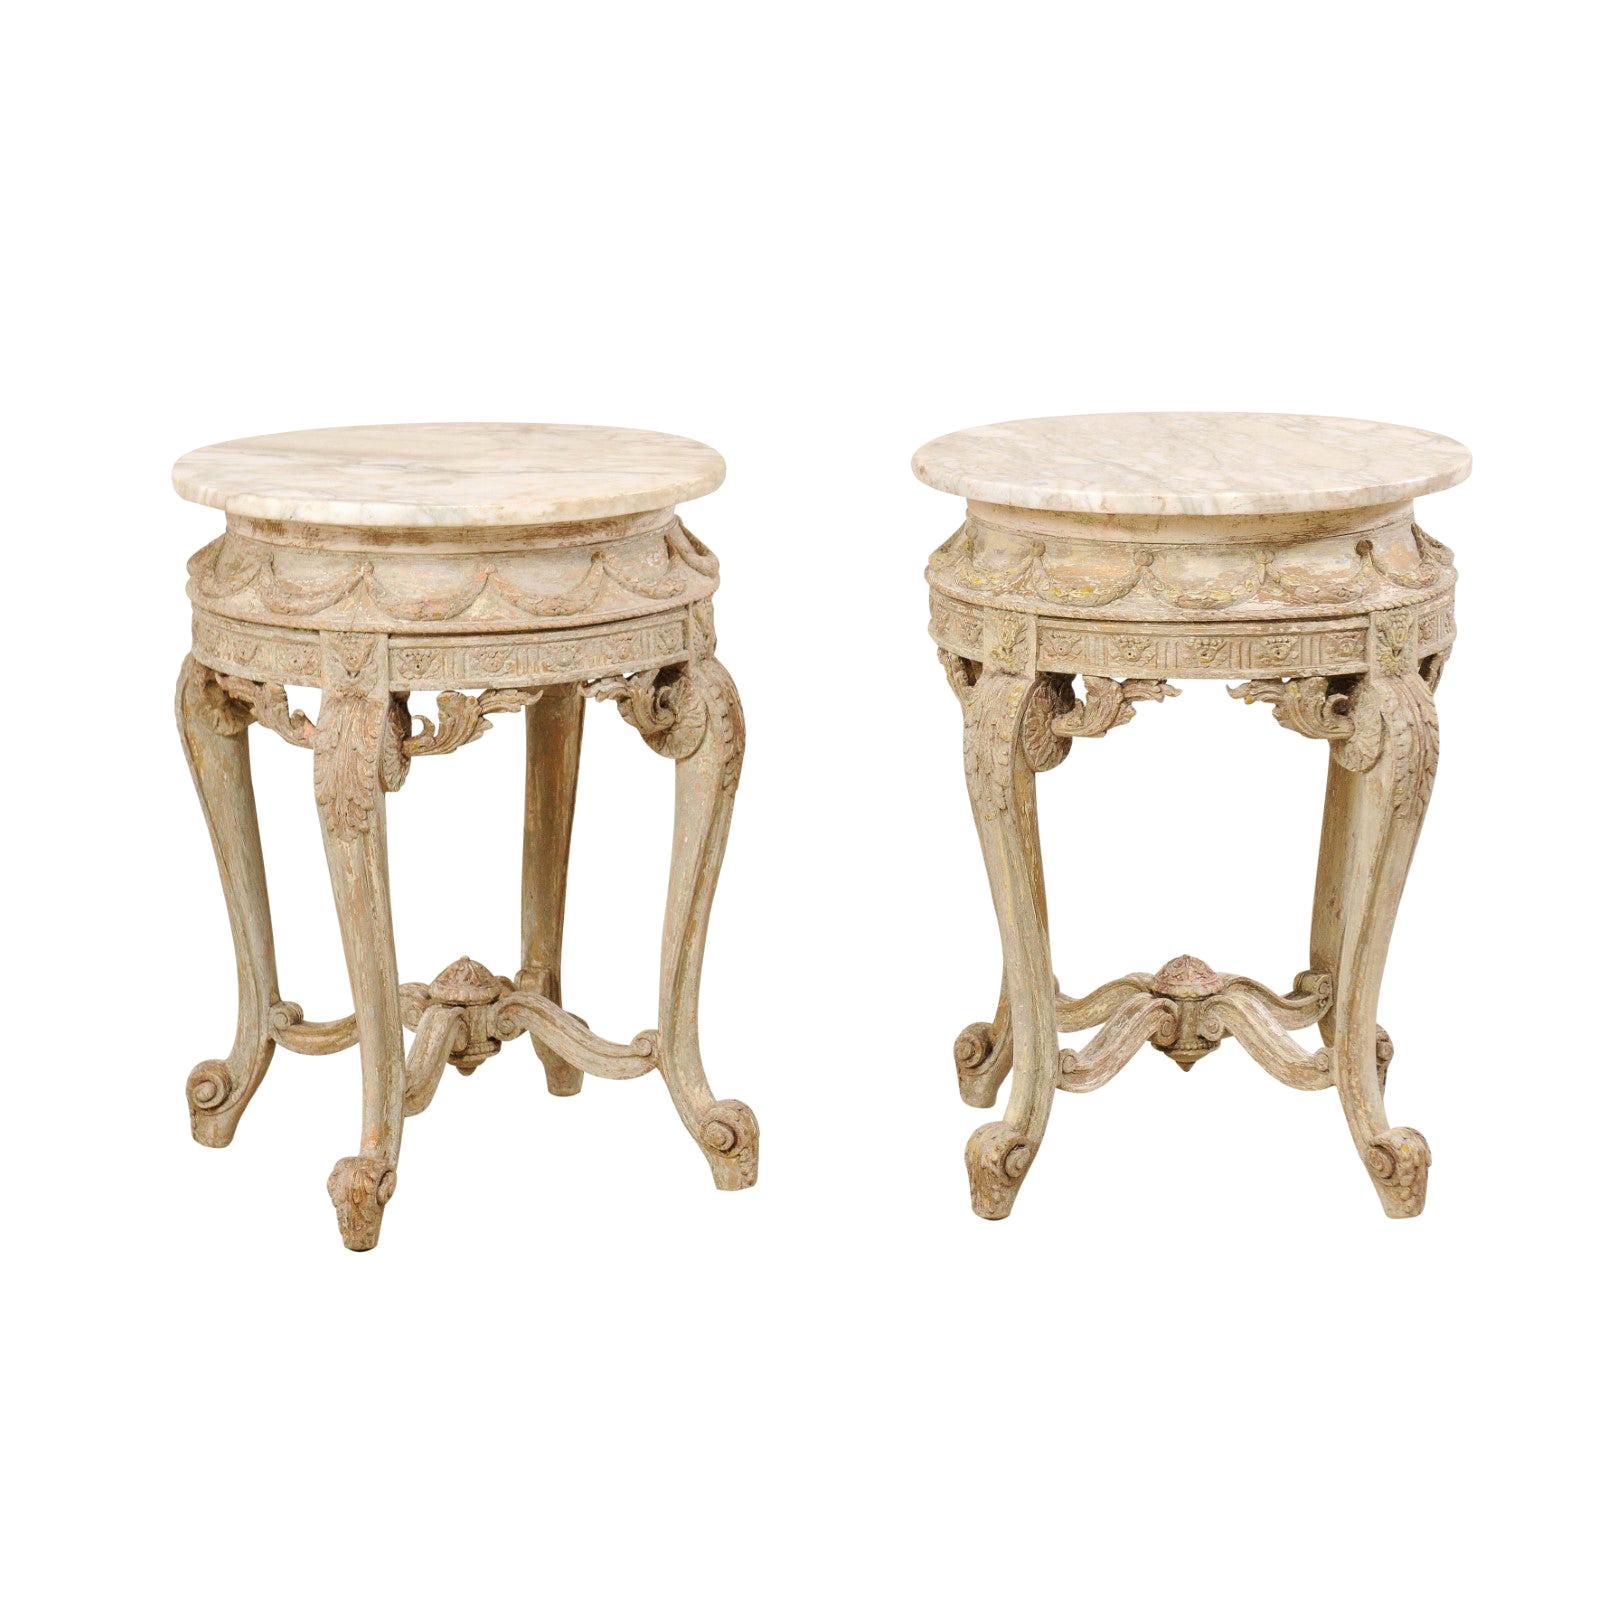 Pair of Italian Rococo Style Marble-Top Side Tables